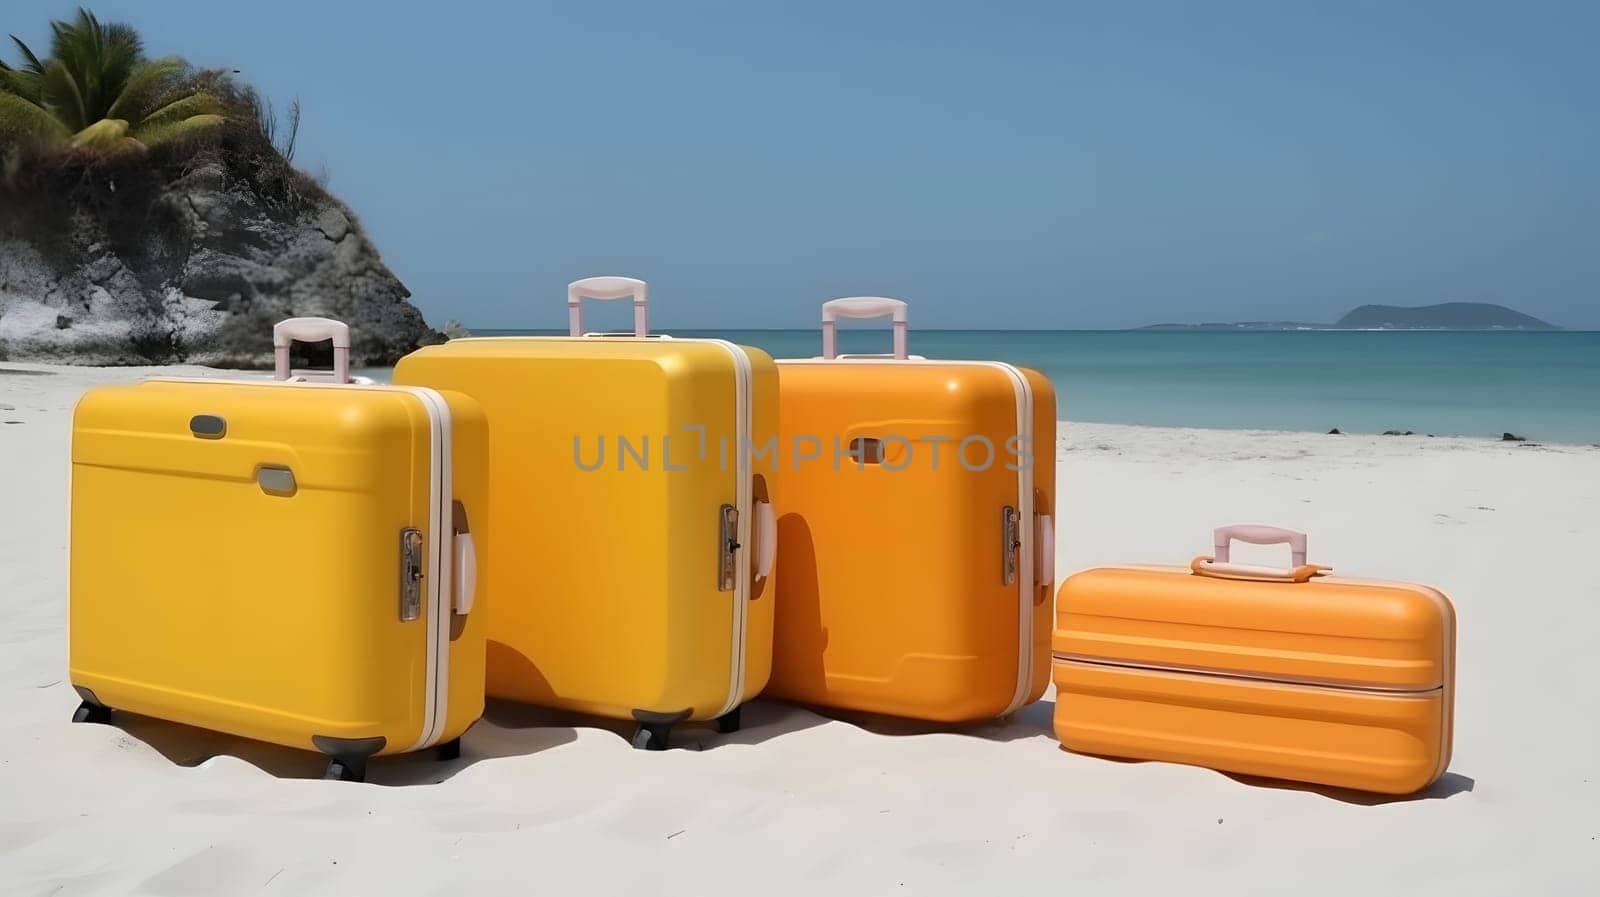 few modern yellow suitcases on tropical resort beach at sunny day, neural network generated art by z1b